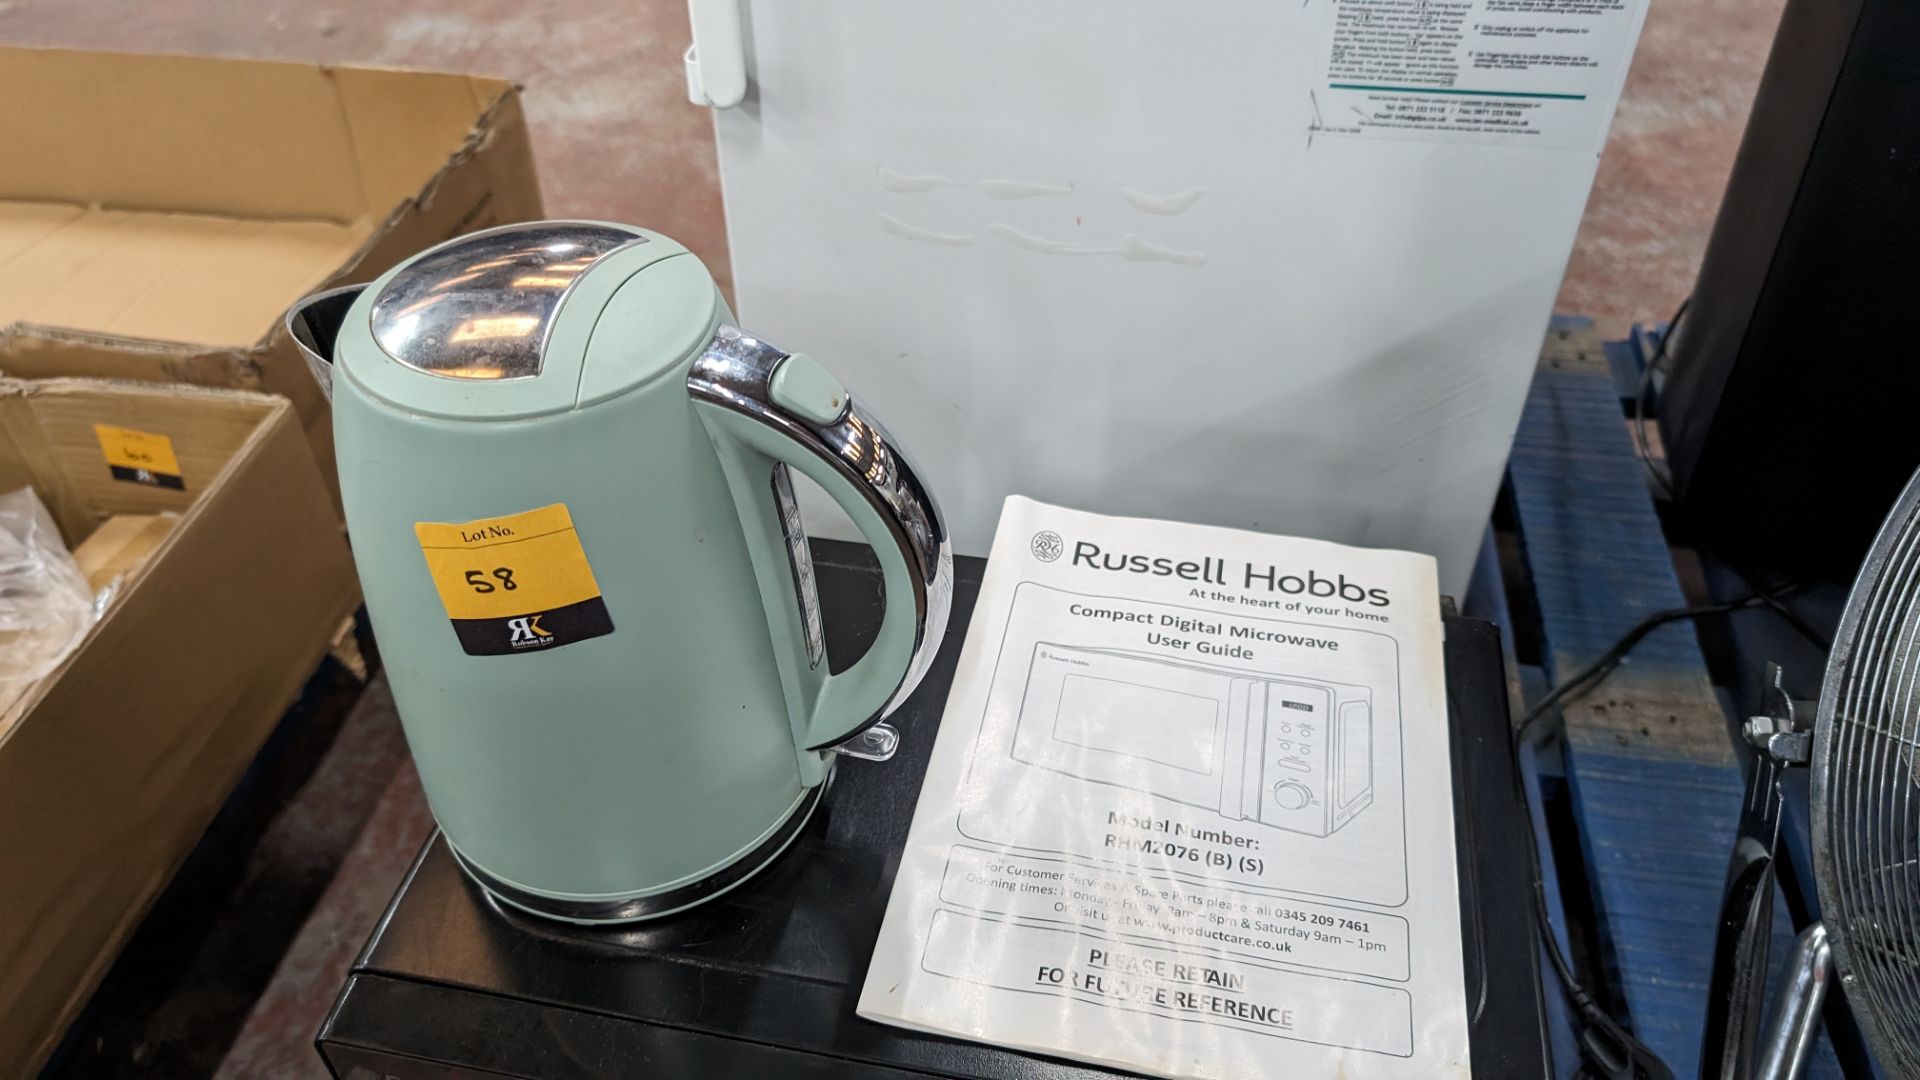 Russell Hobbs microwave & George Home cordless kettle - Image 3 of 9